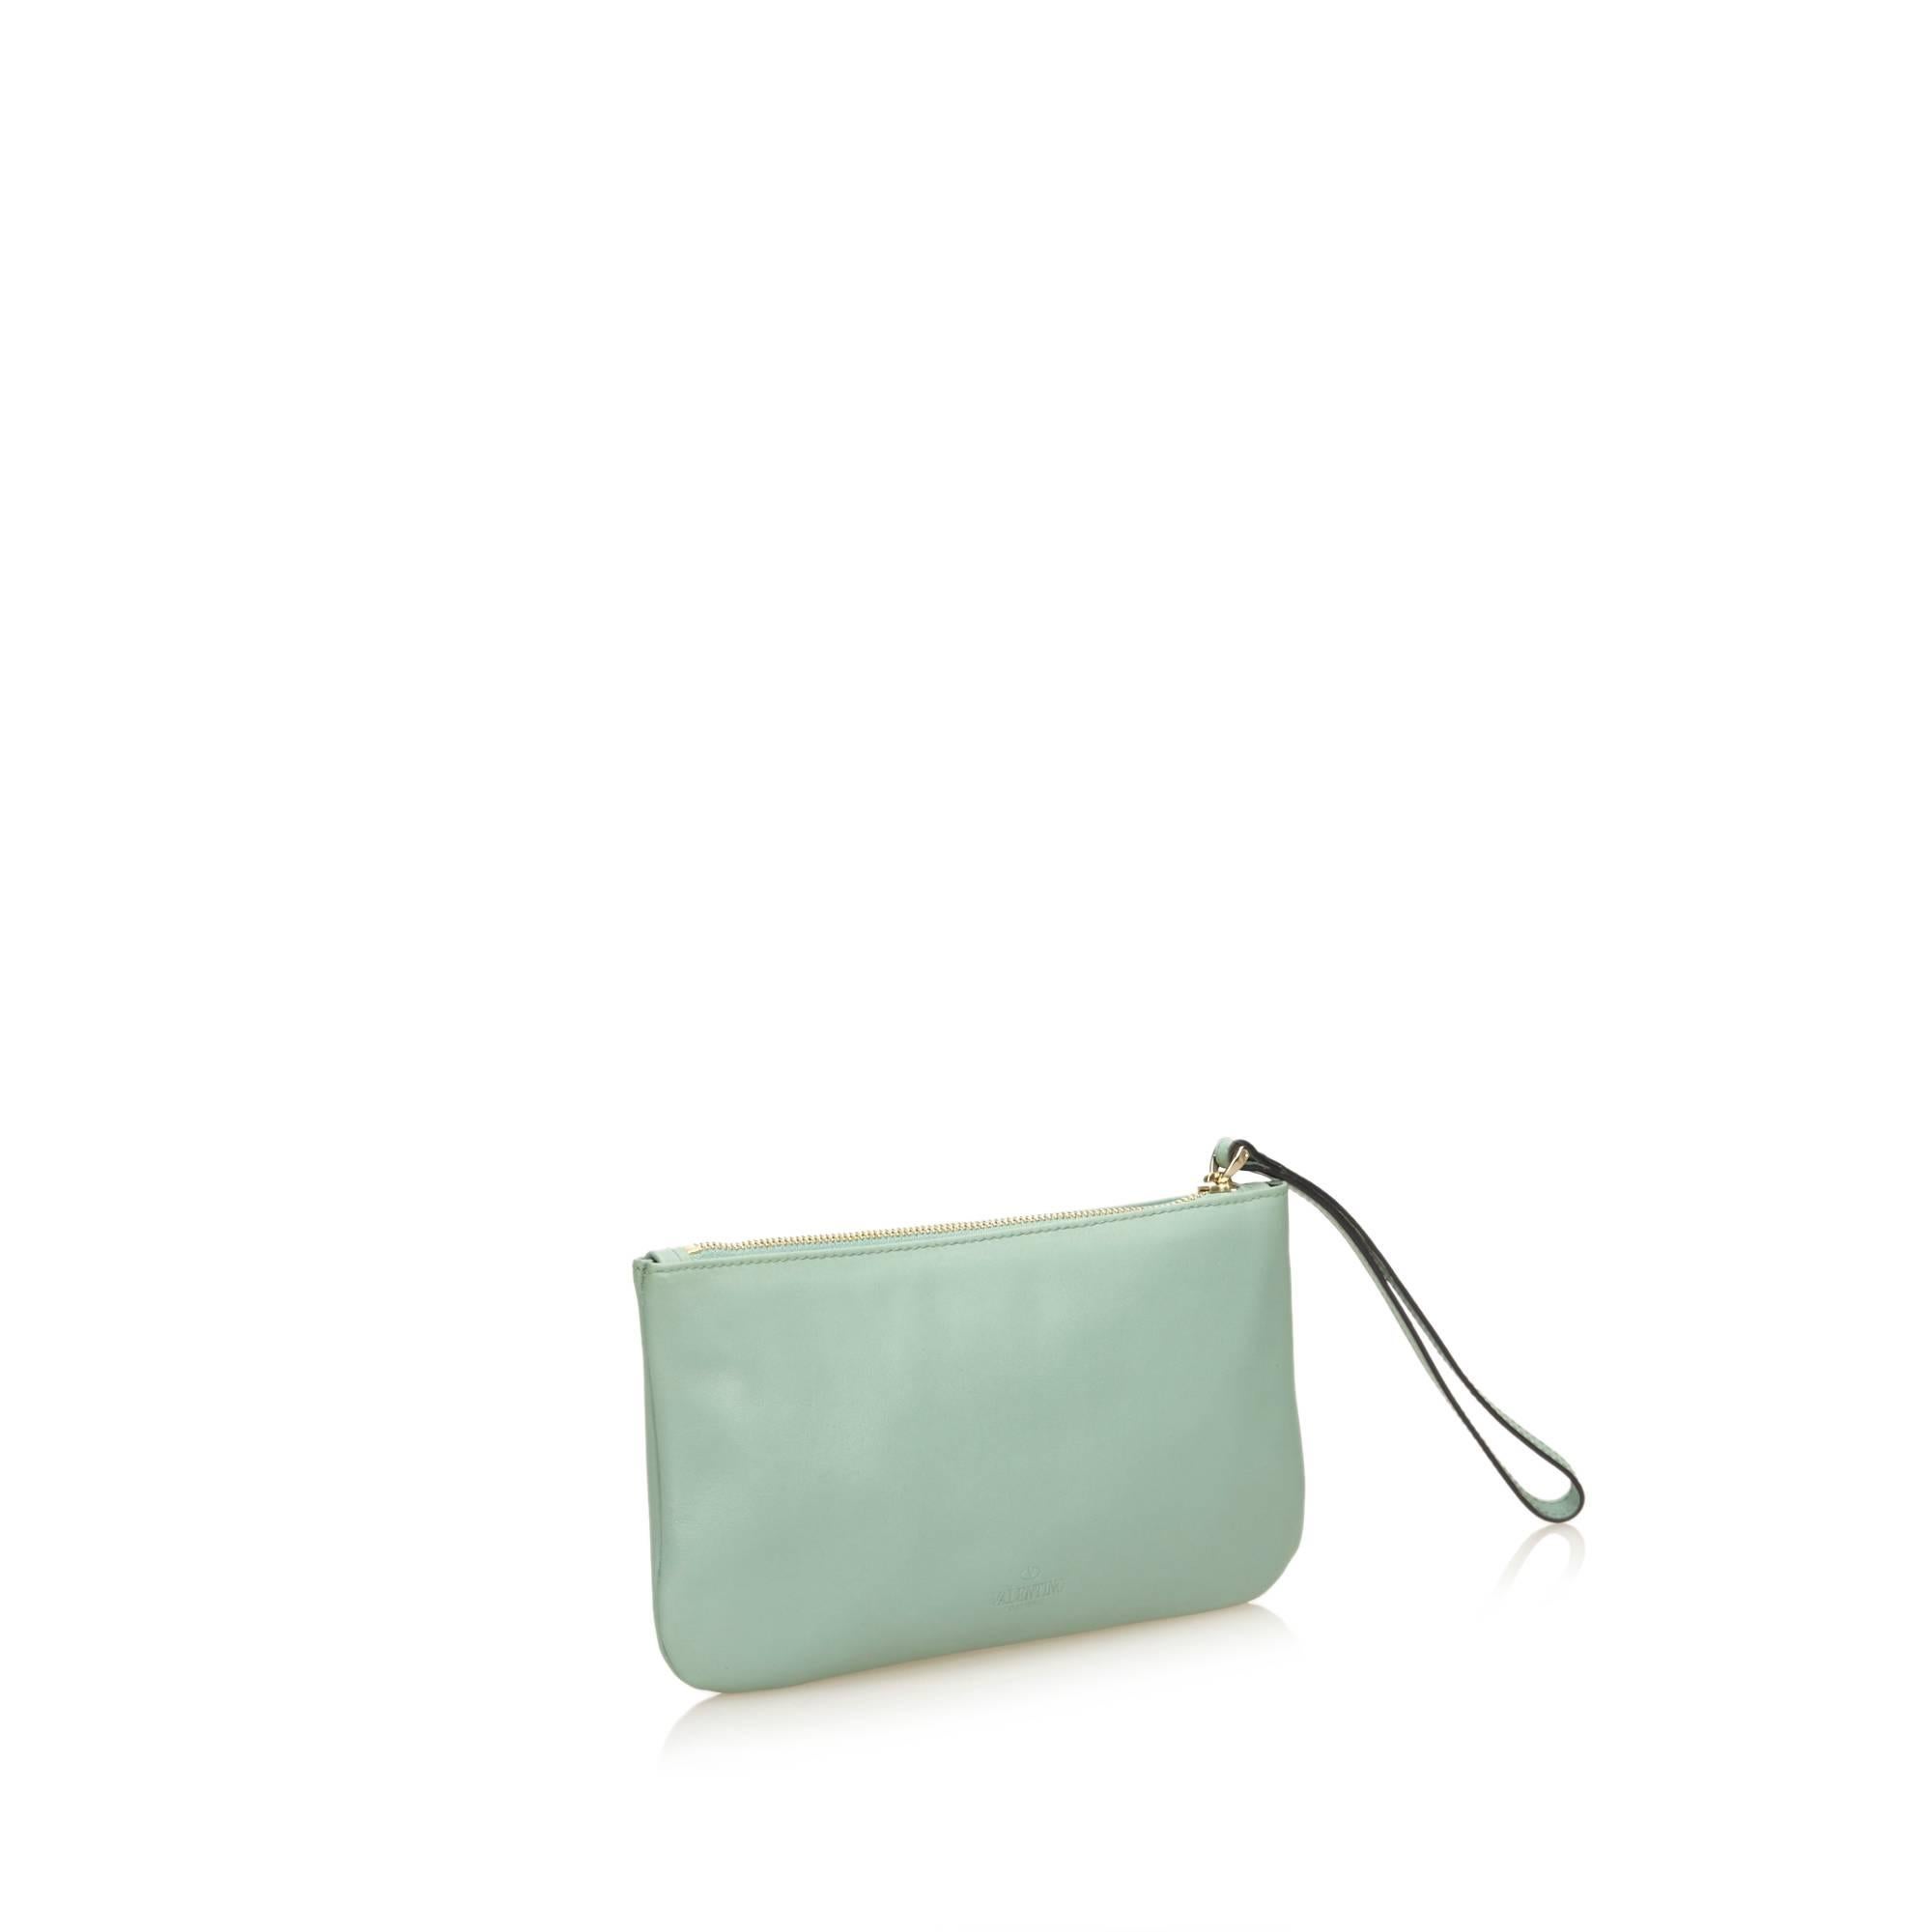 Product details:  Mint green leather wristlet by Valentino.  Top zip closure.  Wristlet strap.  Lined interior.  Goldtone hardware.  8